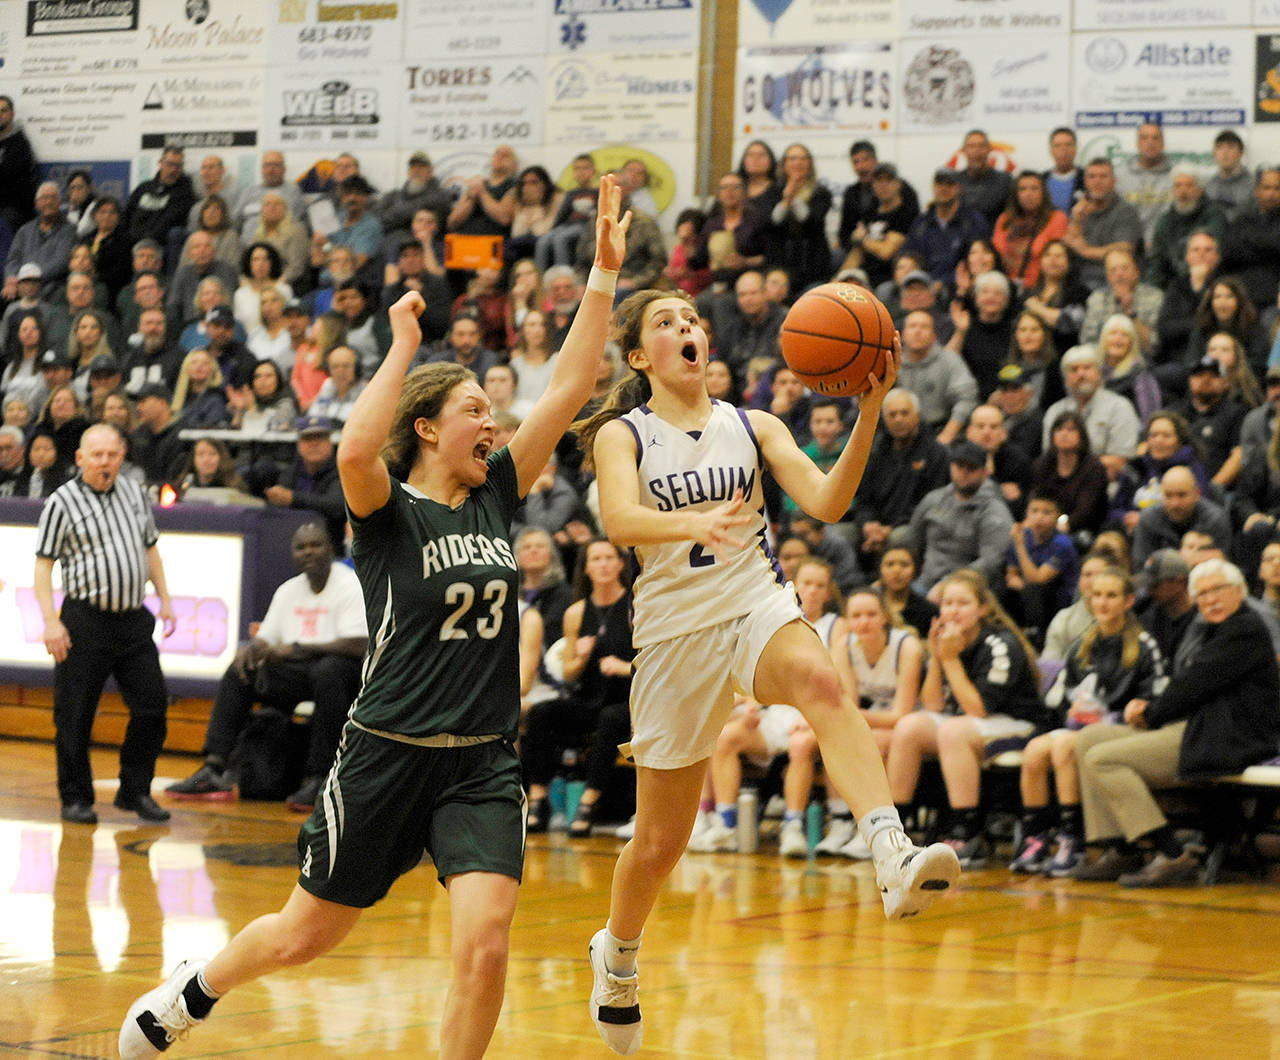 Michael Dashiell/Olympic Peninsula News Group Port Angeles’ Madison Cooke, left, attempts to block the layup attempt of Sequim’s Jessica Dietzman during a game last month. The two teams learned their state regional opponents, dates and game times Tuesday.